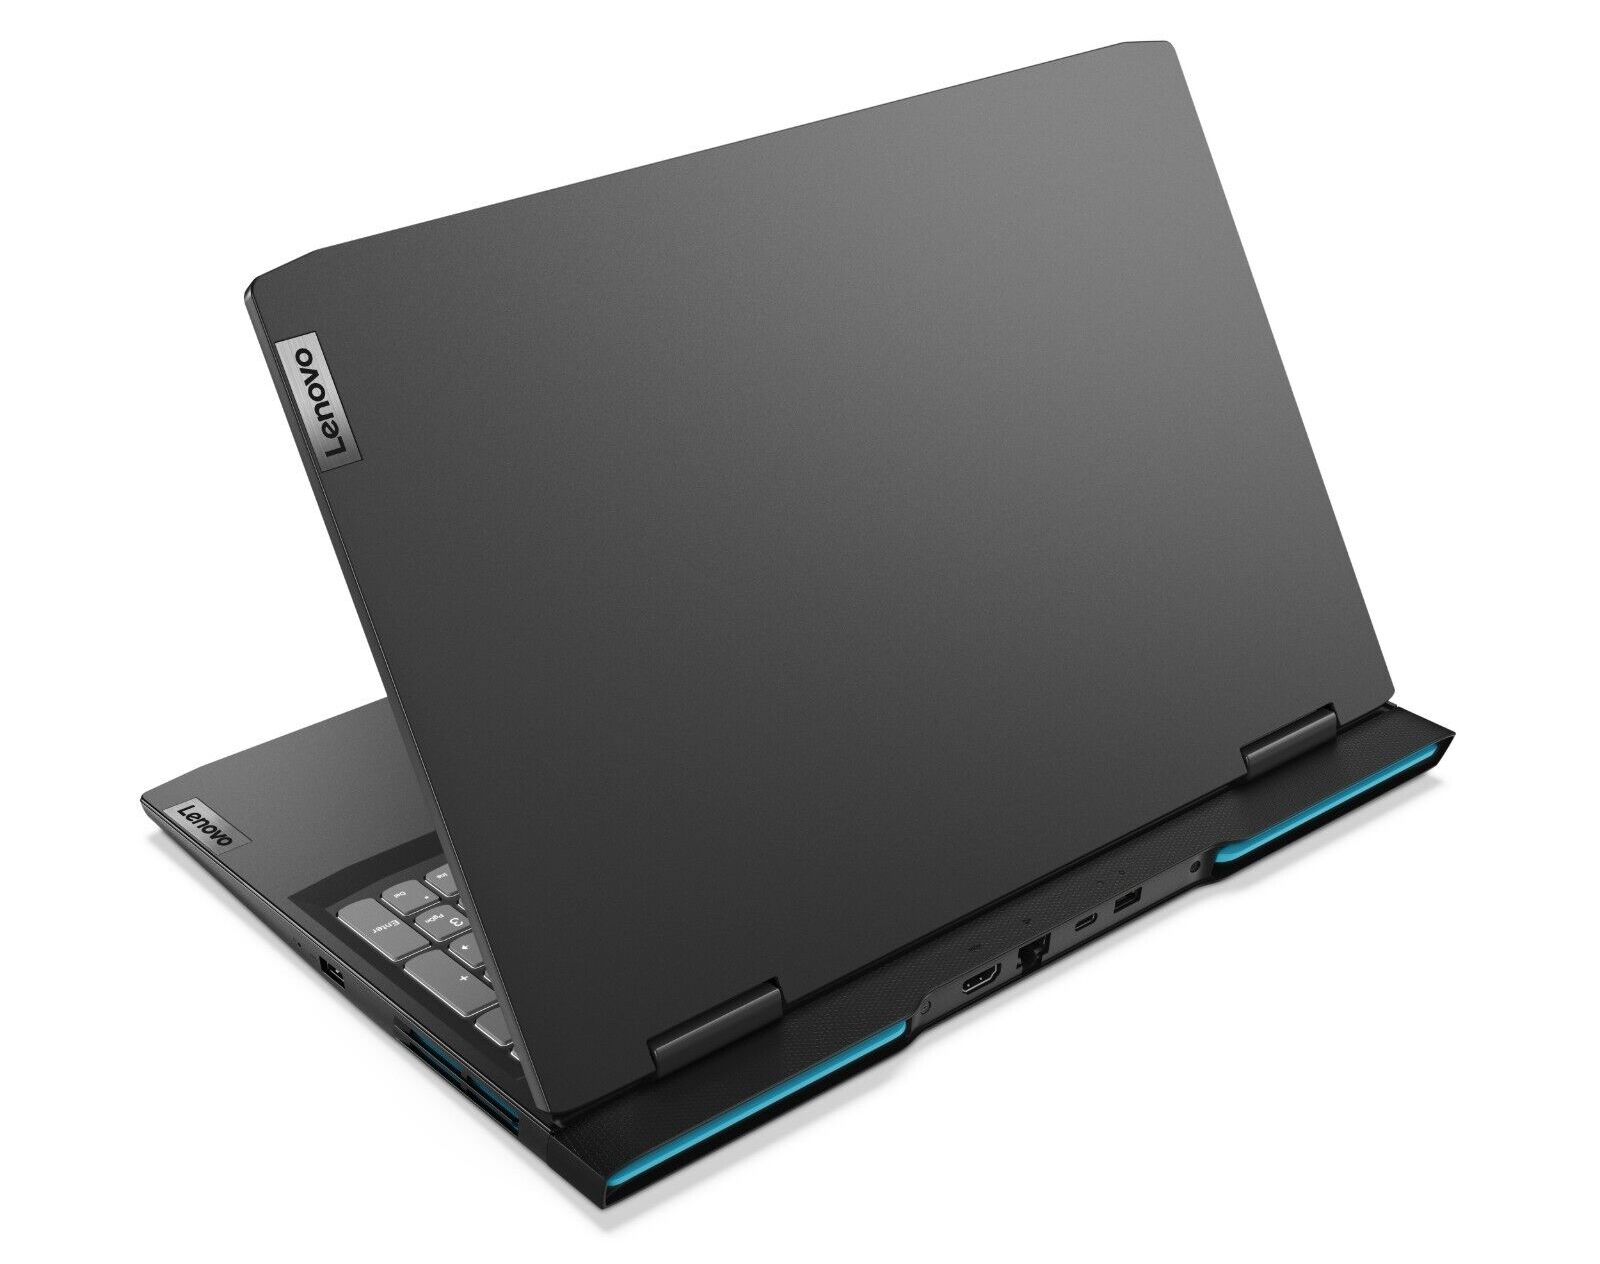 lenovo laptop models and prices